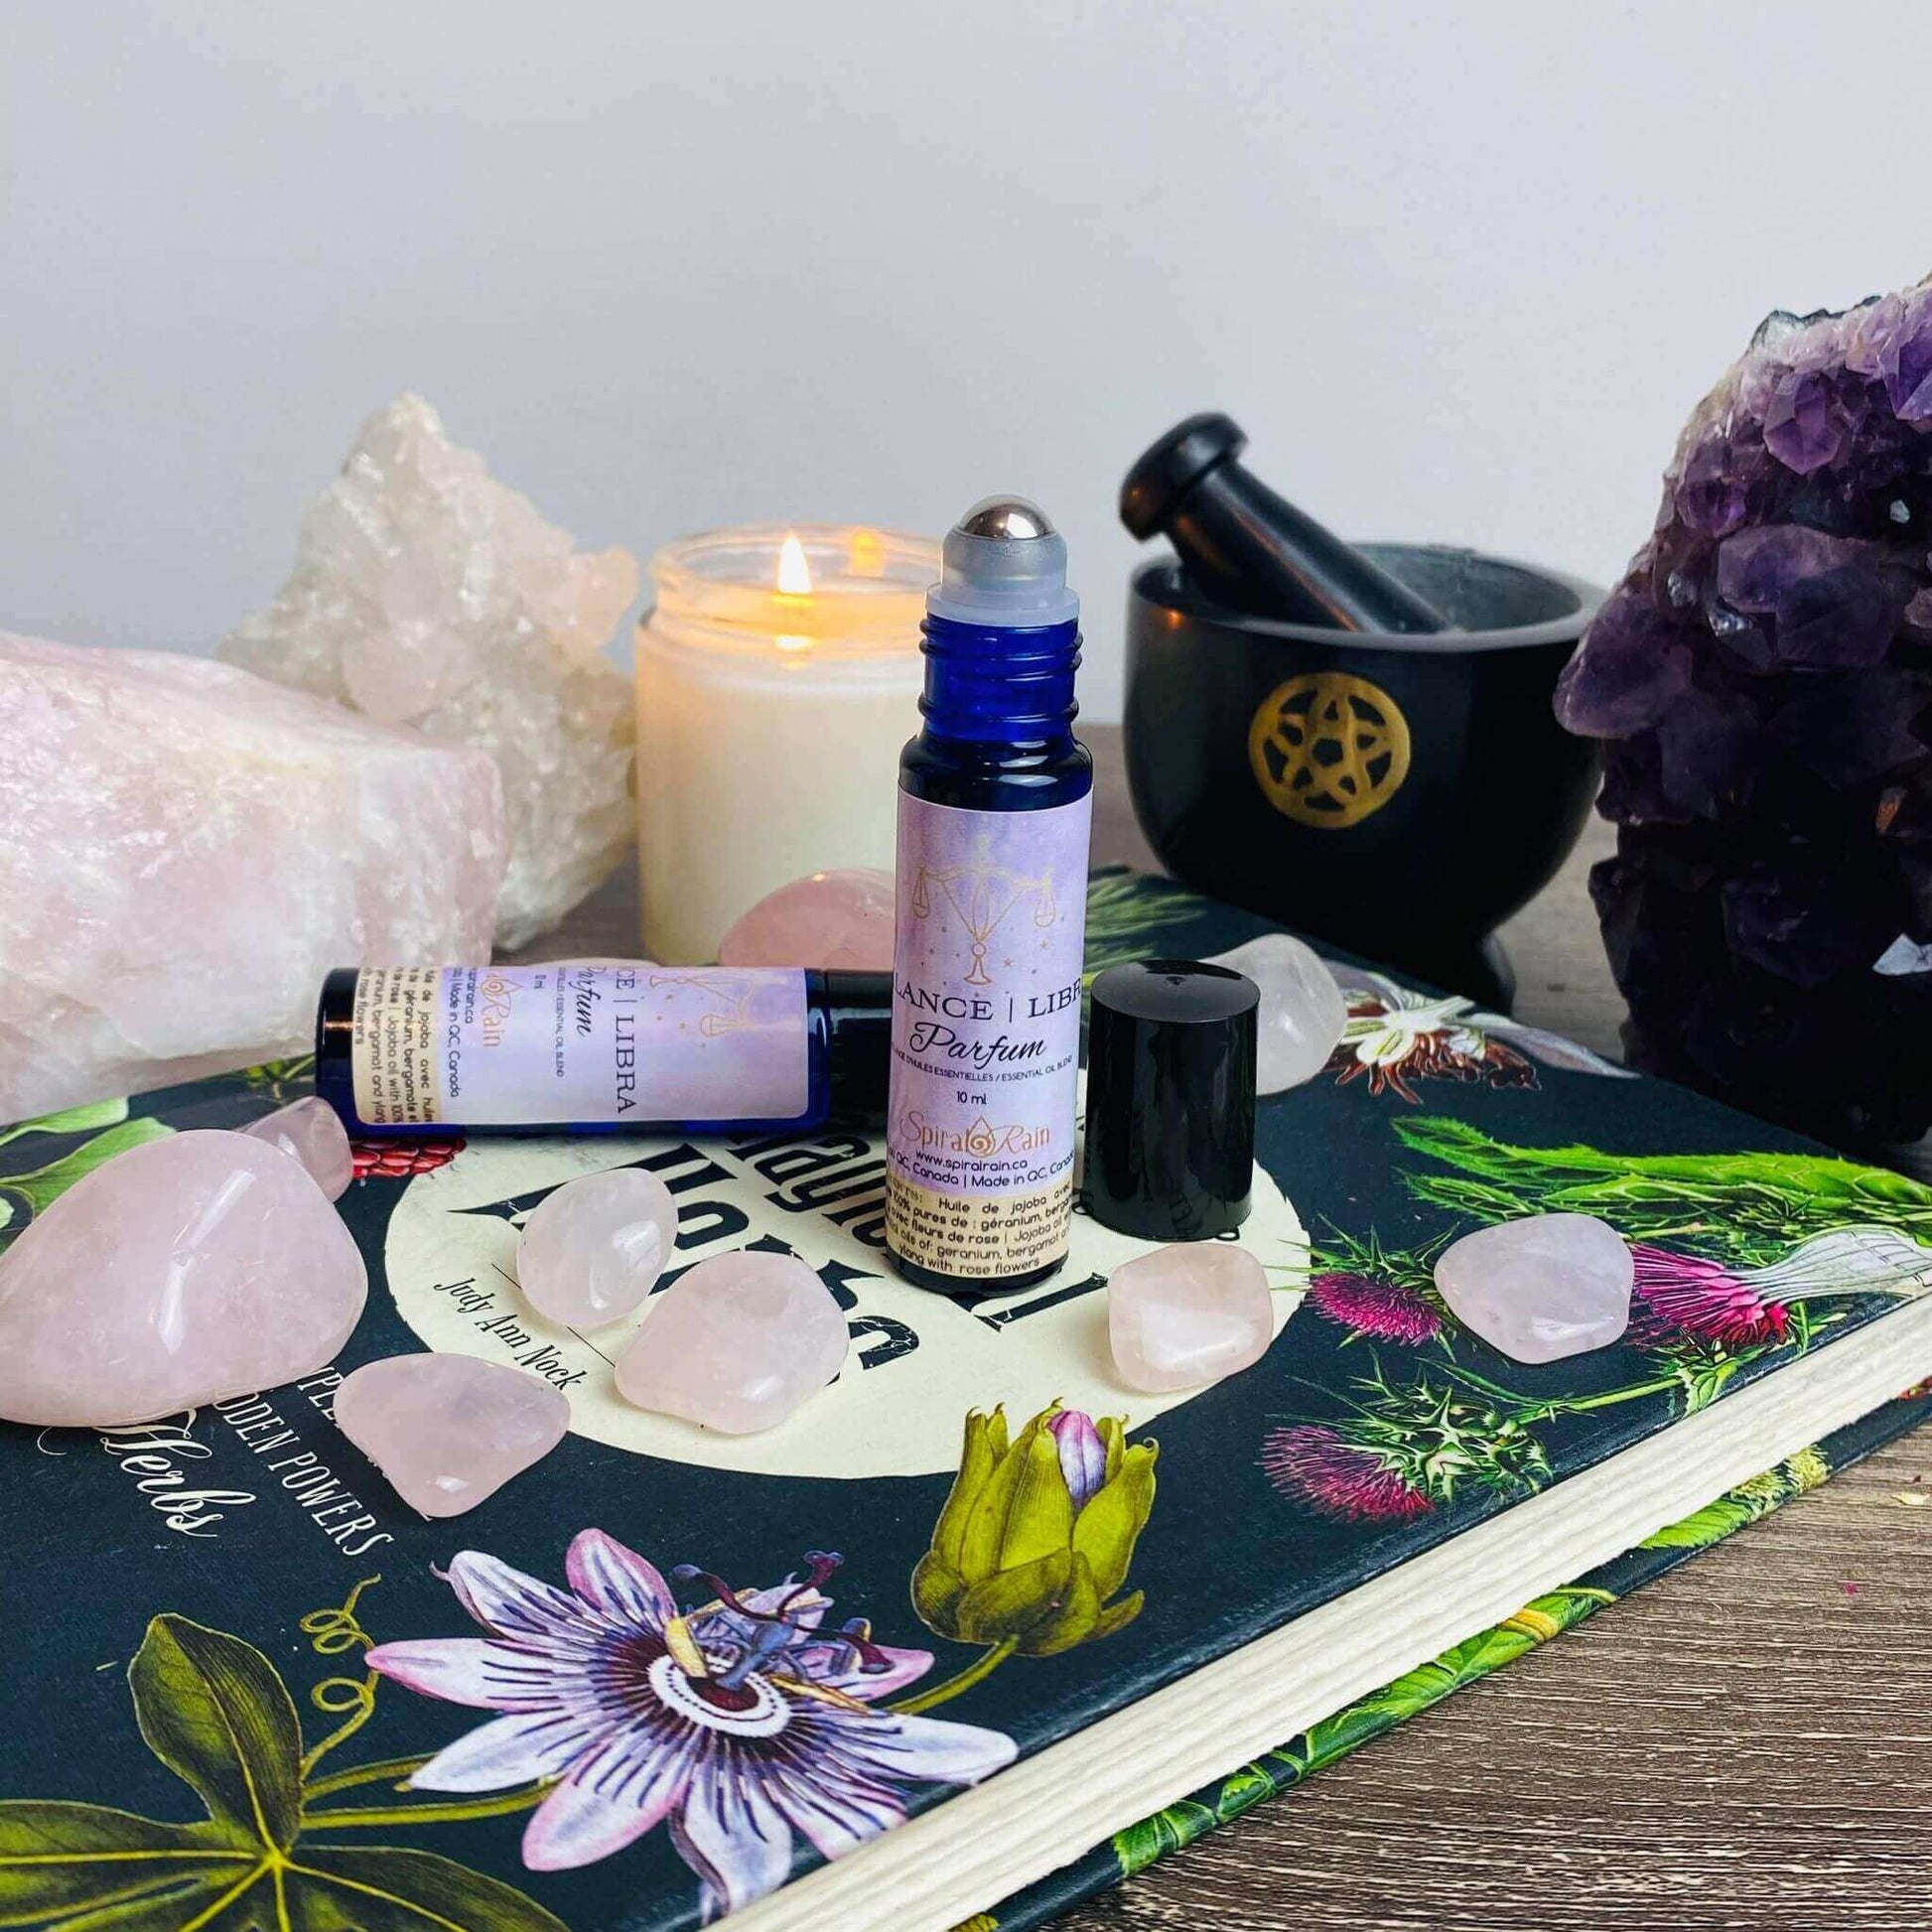 Libra (Sep 23 - Oct 22) Box at $85 only from Spiral Rain